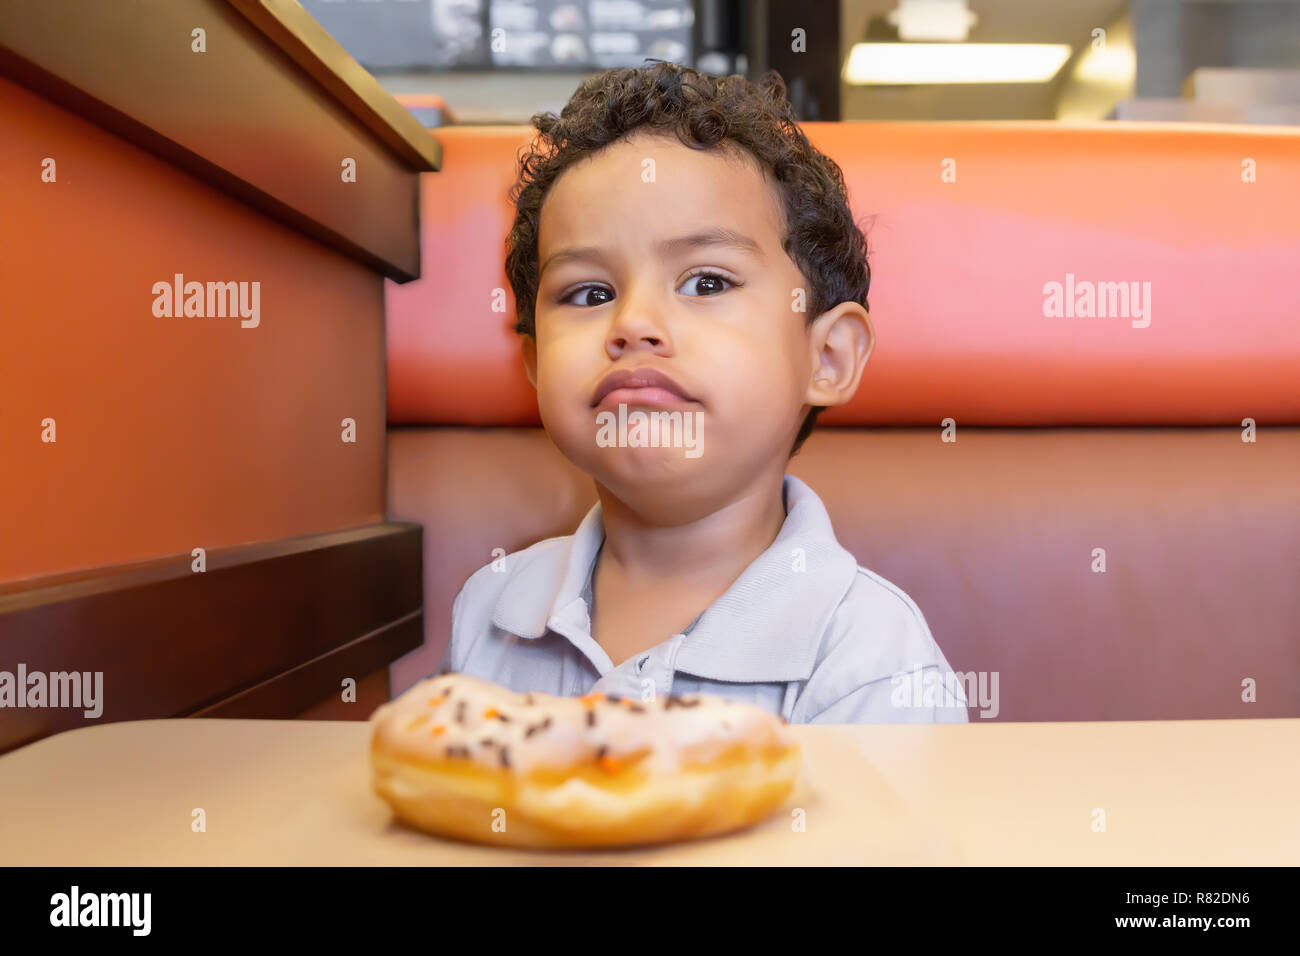 A little boy has a serious expression while he eats a donut in a booth. Head up, eyes focused to the side with a glaring stare. Stock Photo